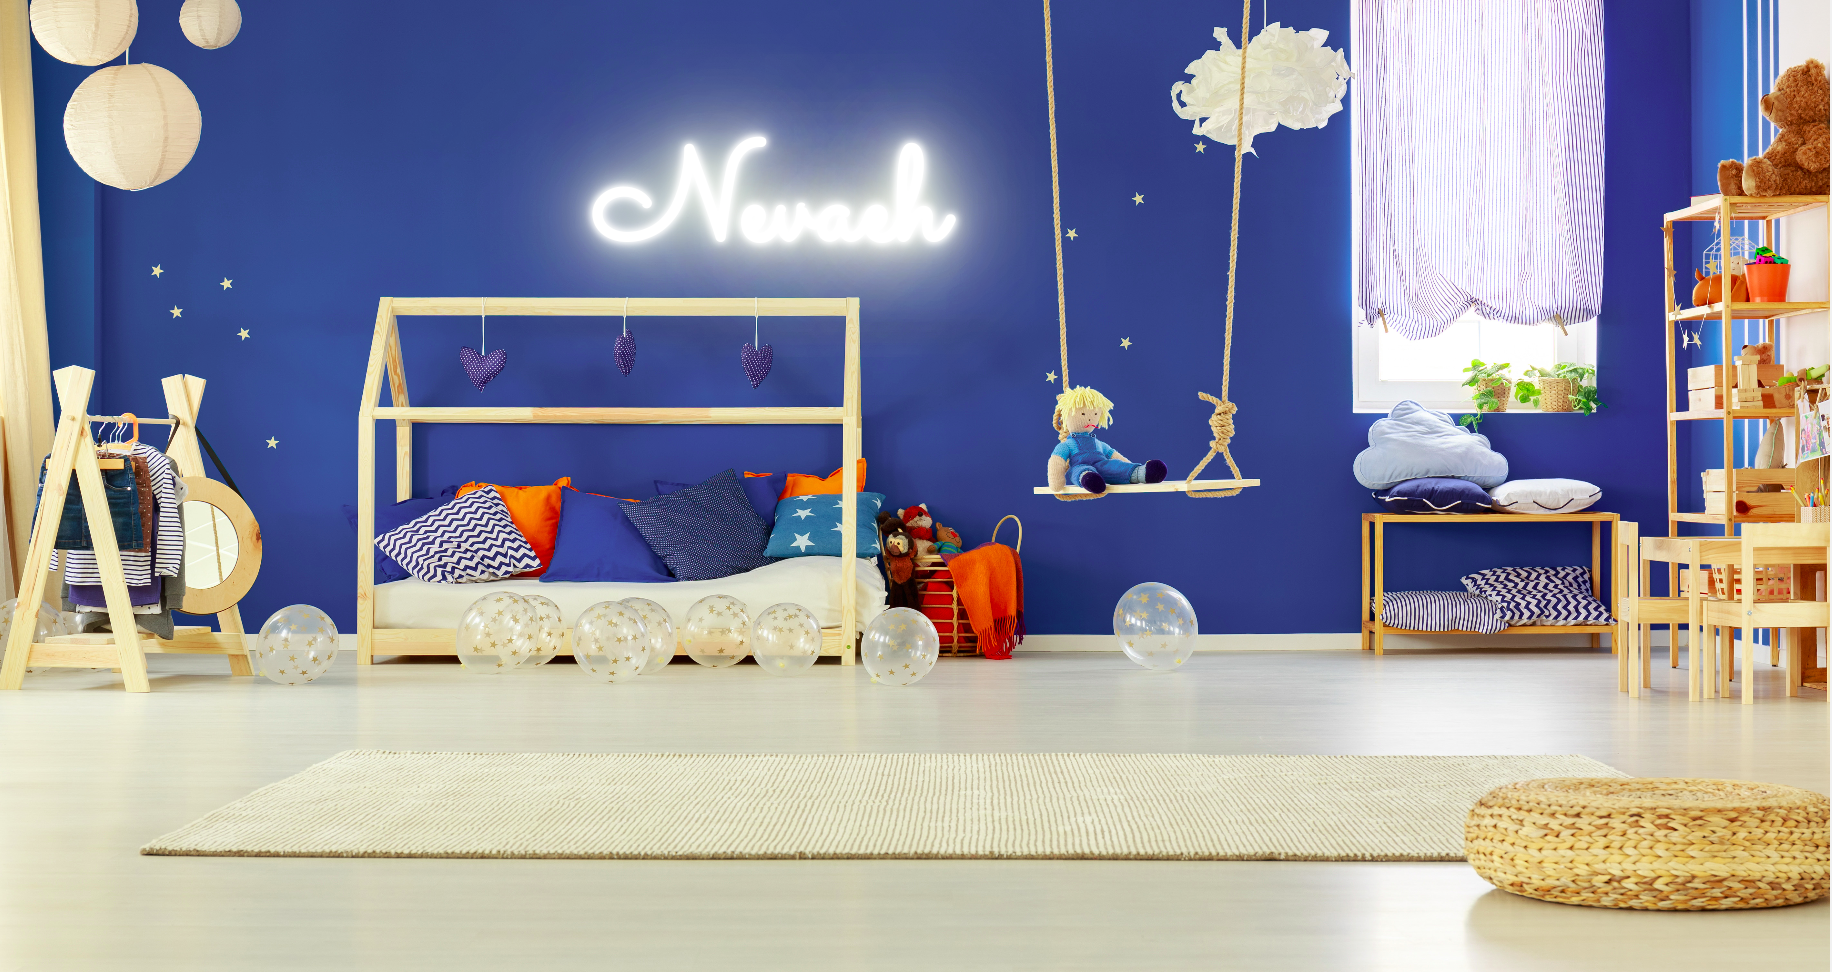 "Nevaeh" Baby Name LED Neon Sign